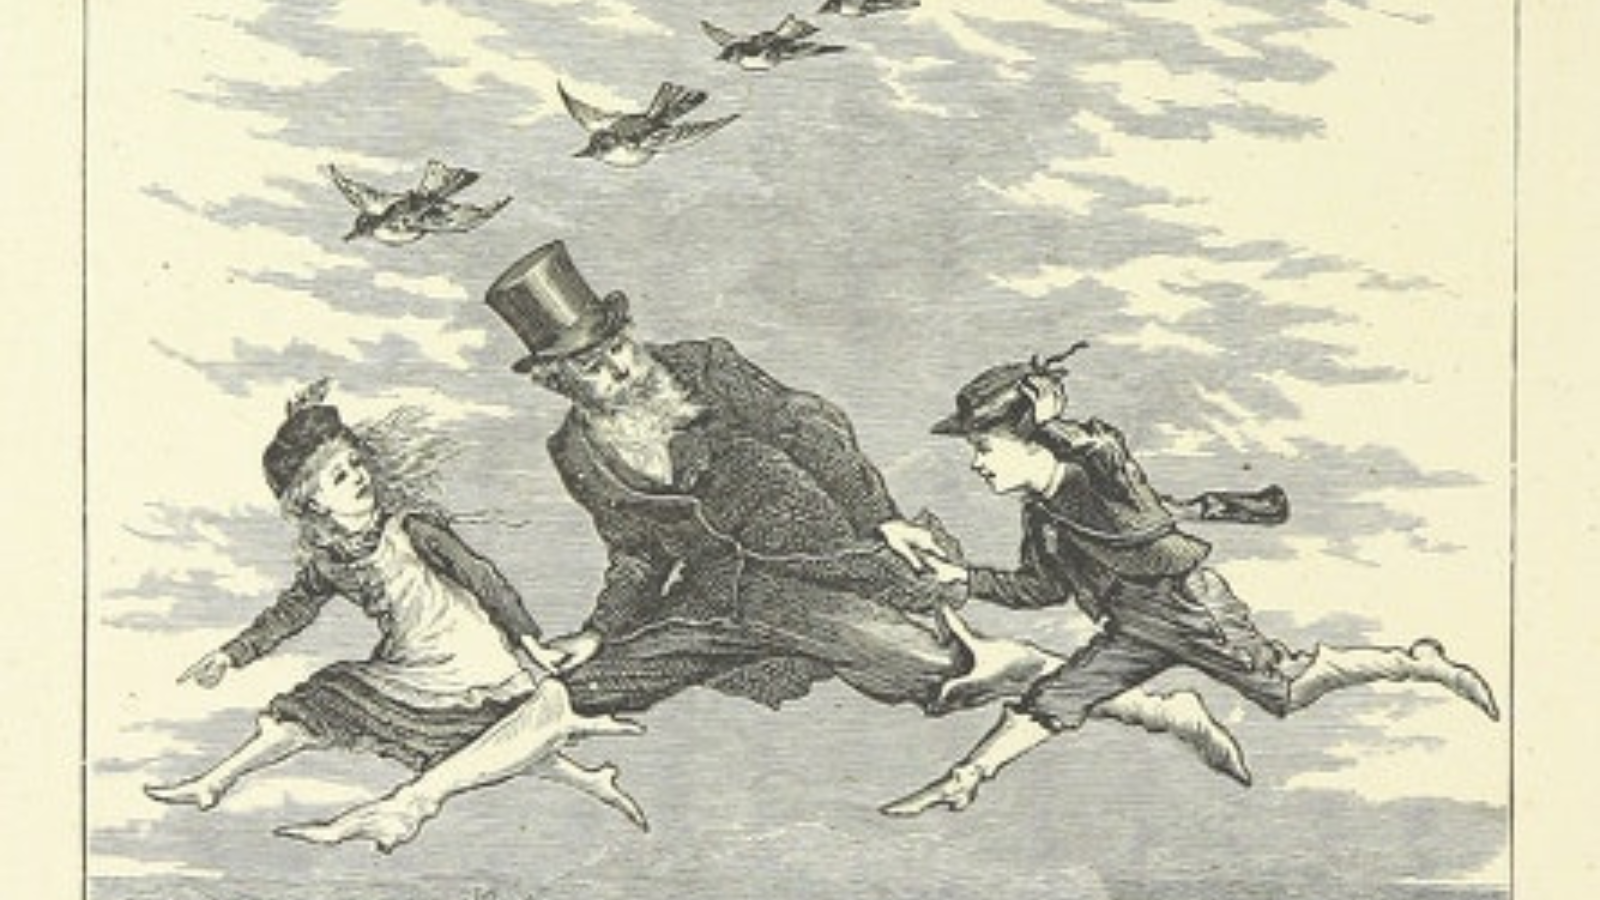 In a segment of a black and white etching, a bearded man in a tophat and coat holds hands with two children as they all leap in the air, birds above them, wearing matching white boots seemingly enabling them to fly.